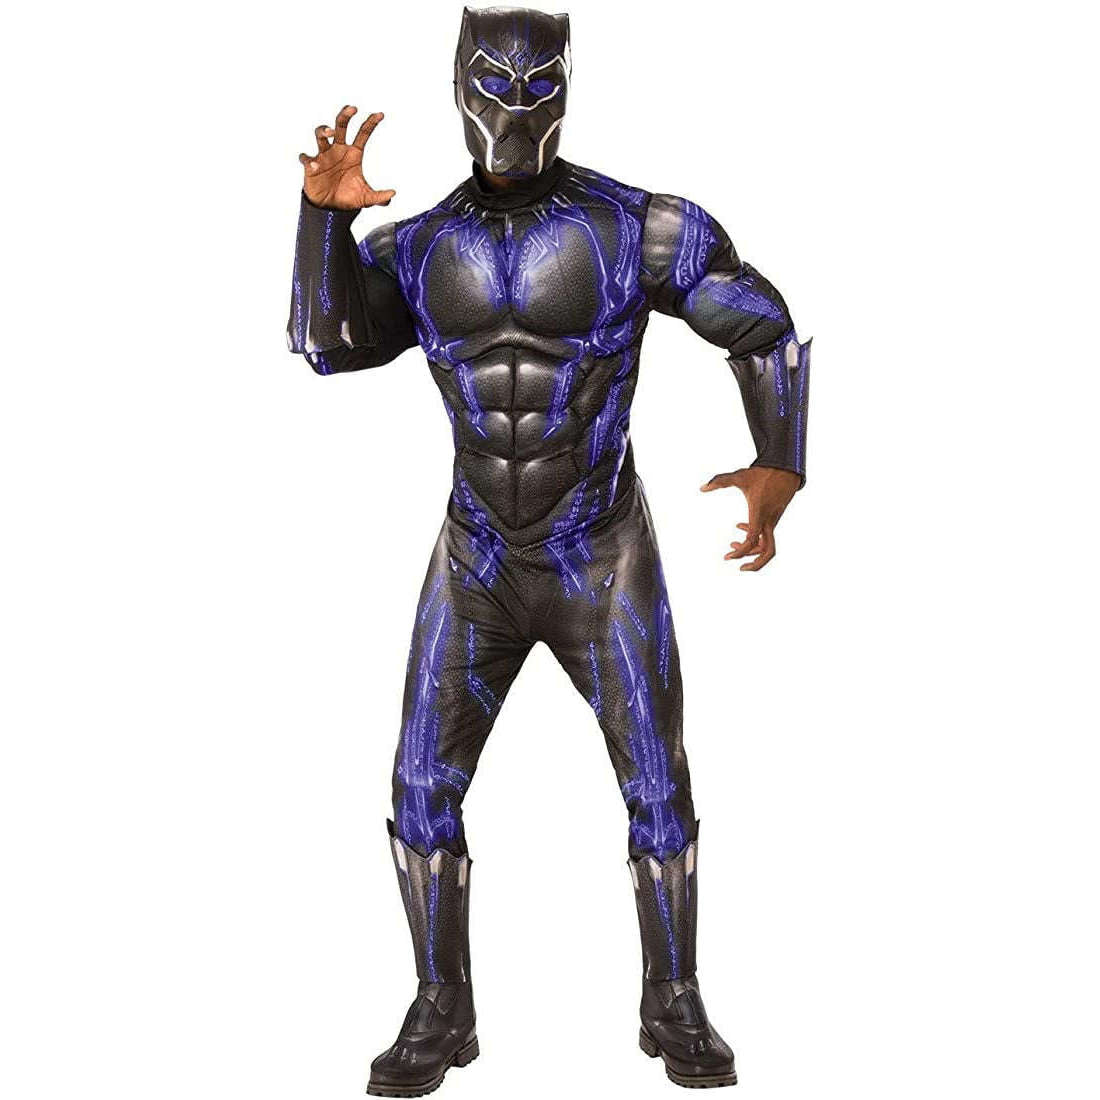 Marvel Avengers Deluxe Black Panther Battle Suit Adult Costume w/ Muscle Chest And Mask